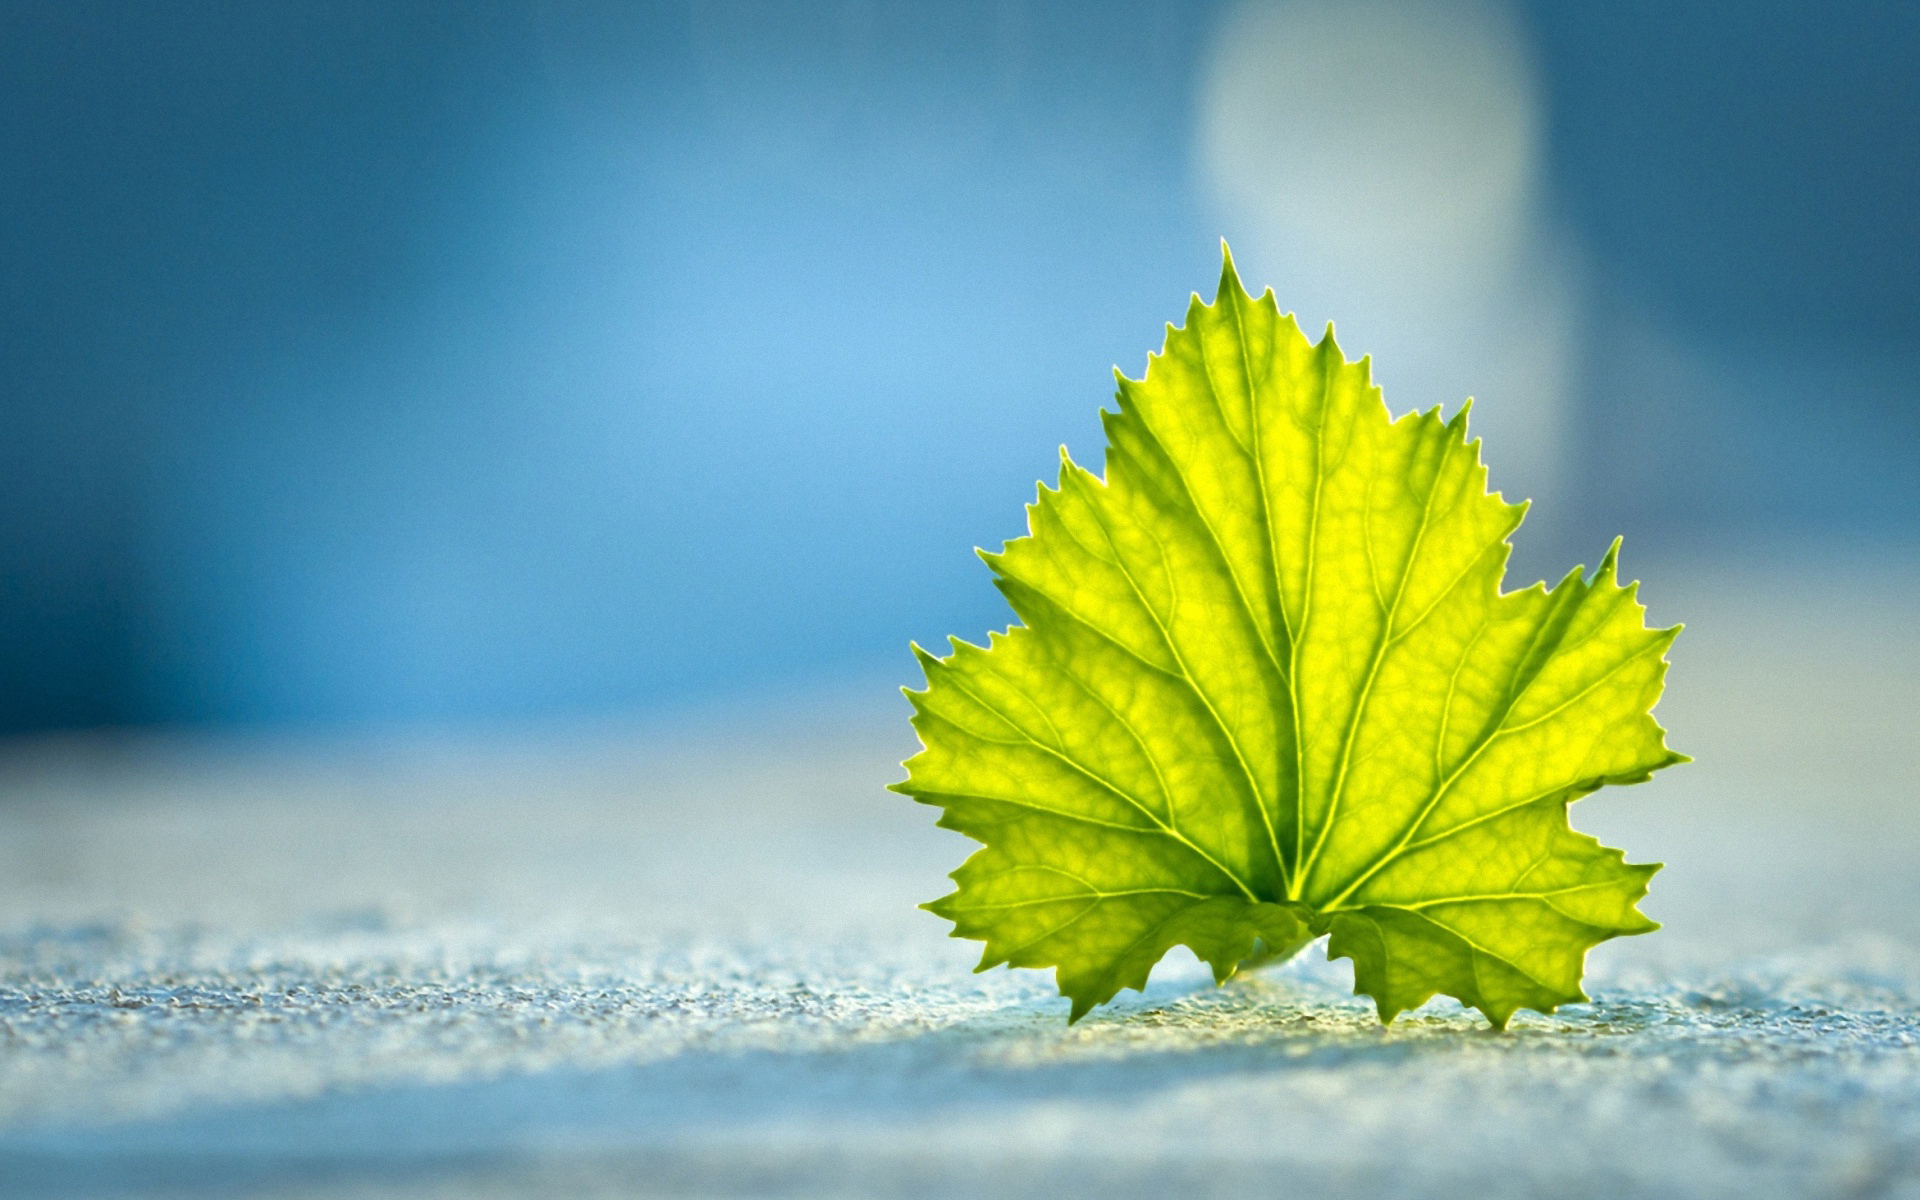 Wallpapers surface leaf green on the desktop